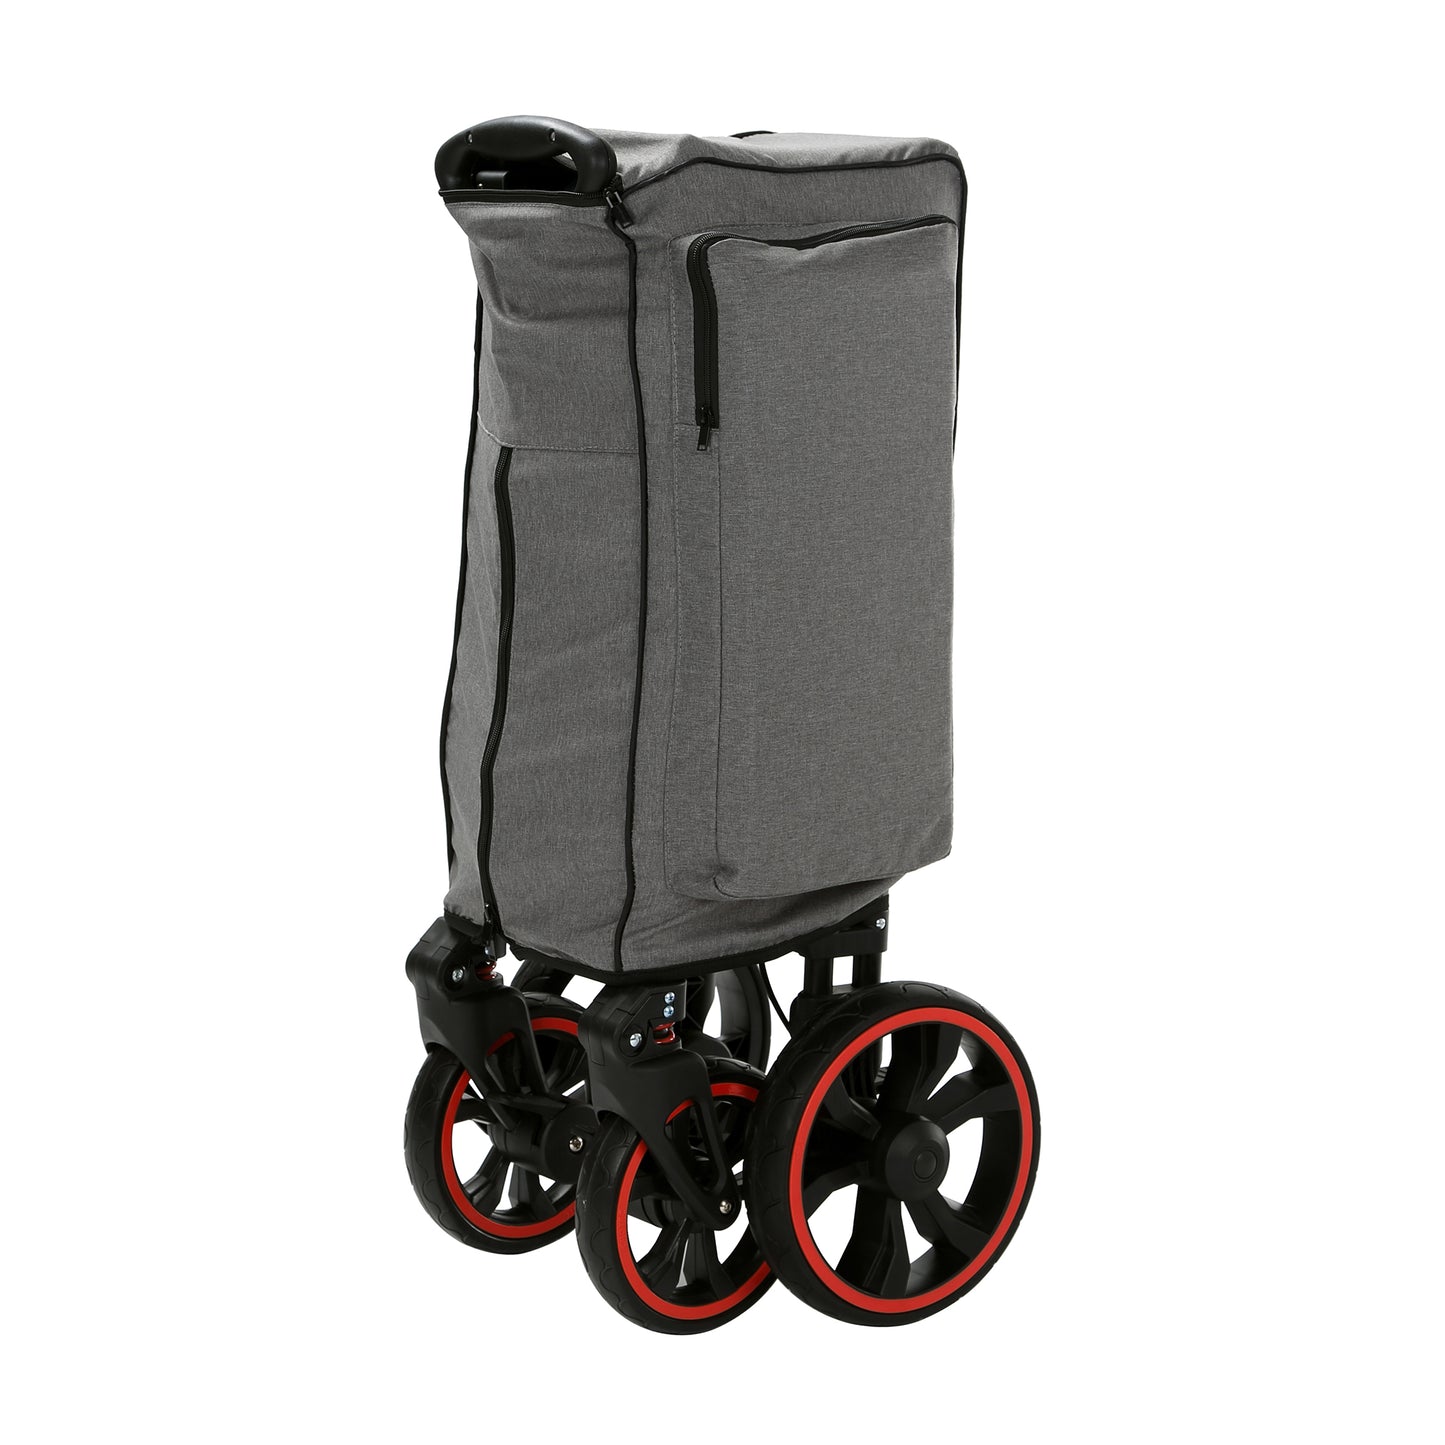 push-pull-folding-stroller-wagon-with-canopy